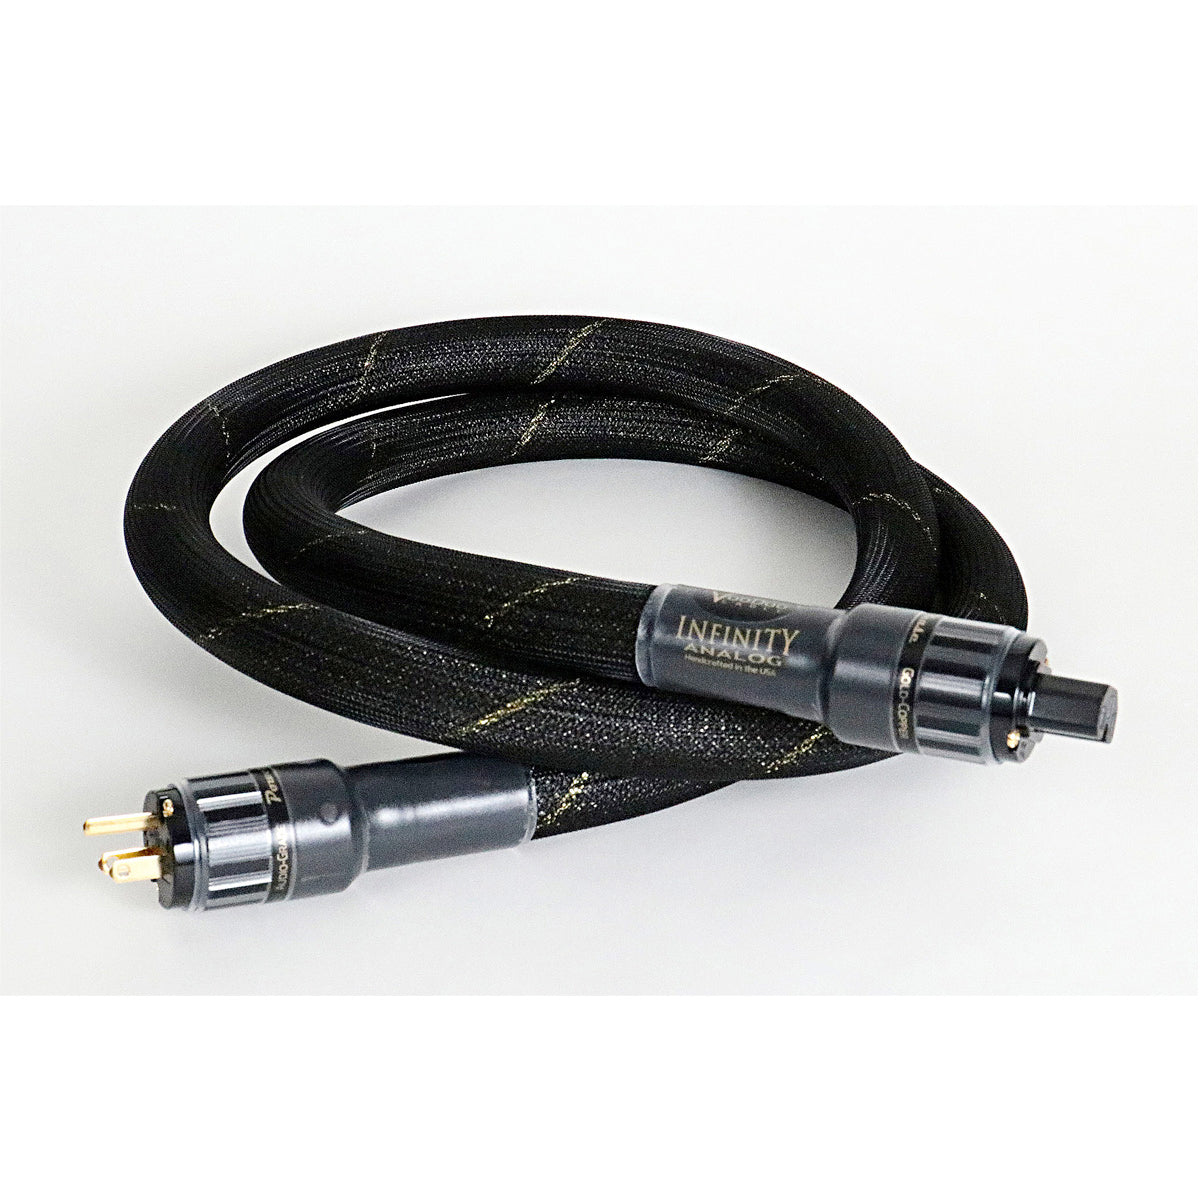 Voodoo INFINITY Analog Cable